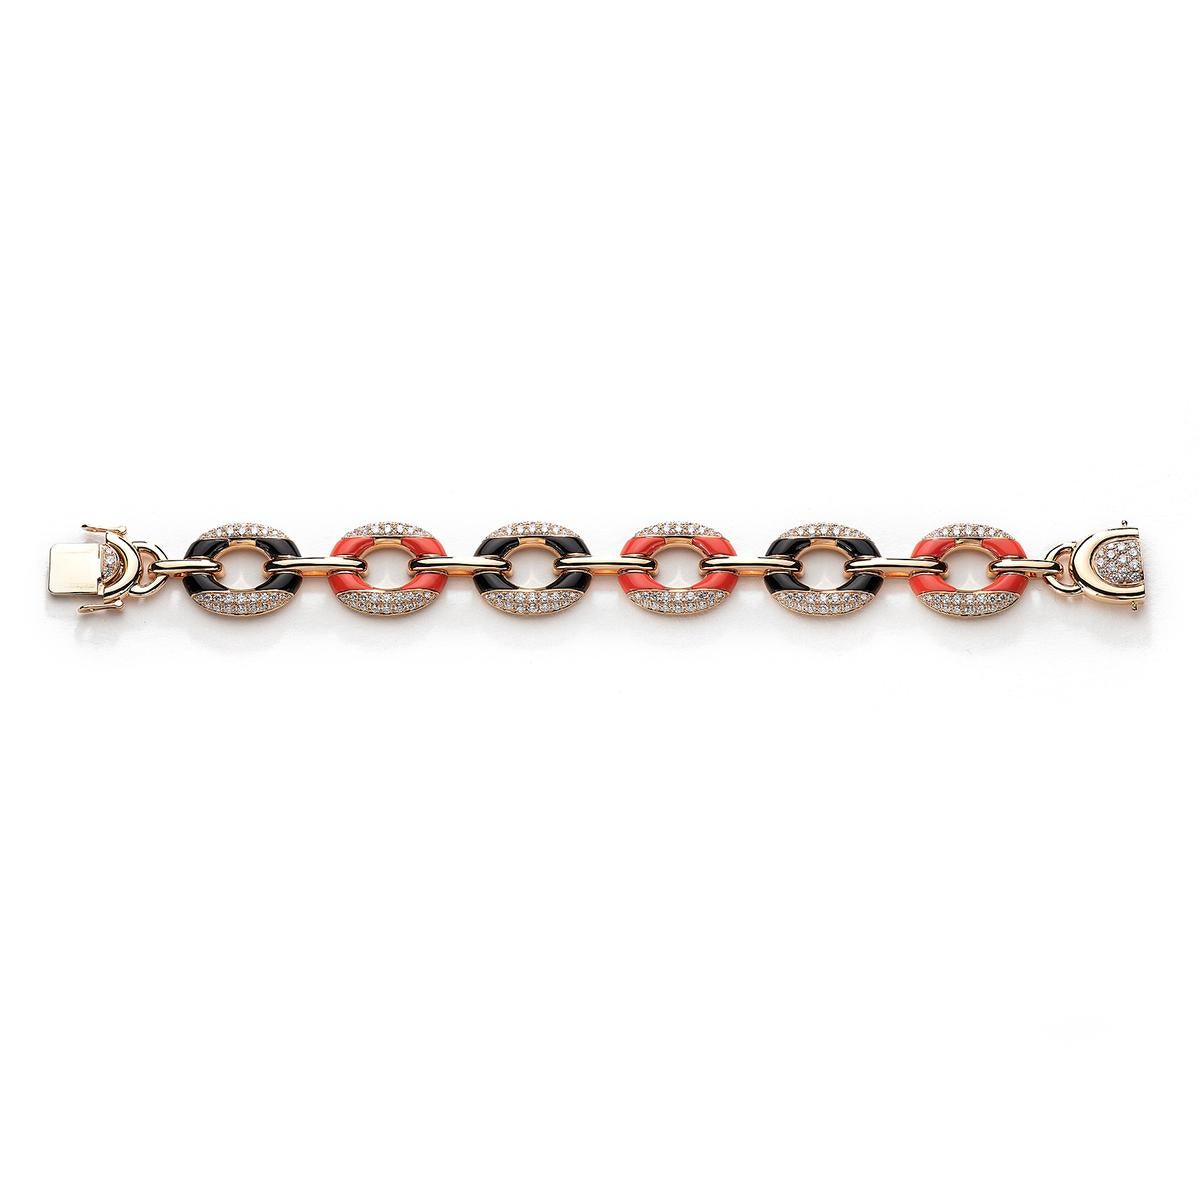 Bracelet in 18kt yellow gold set with 440 diamonds 3.01 cts, 10 onyx 6.74 cts and 10 coral 21.83 cts